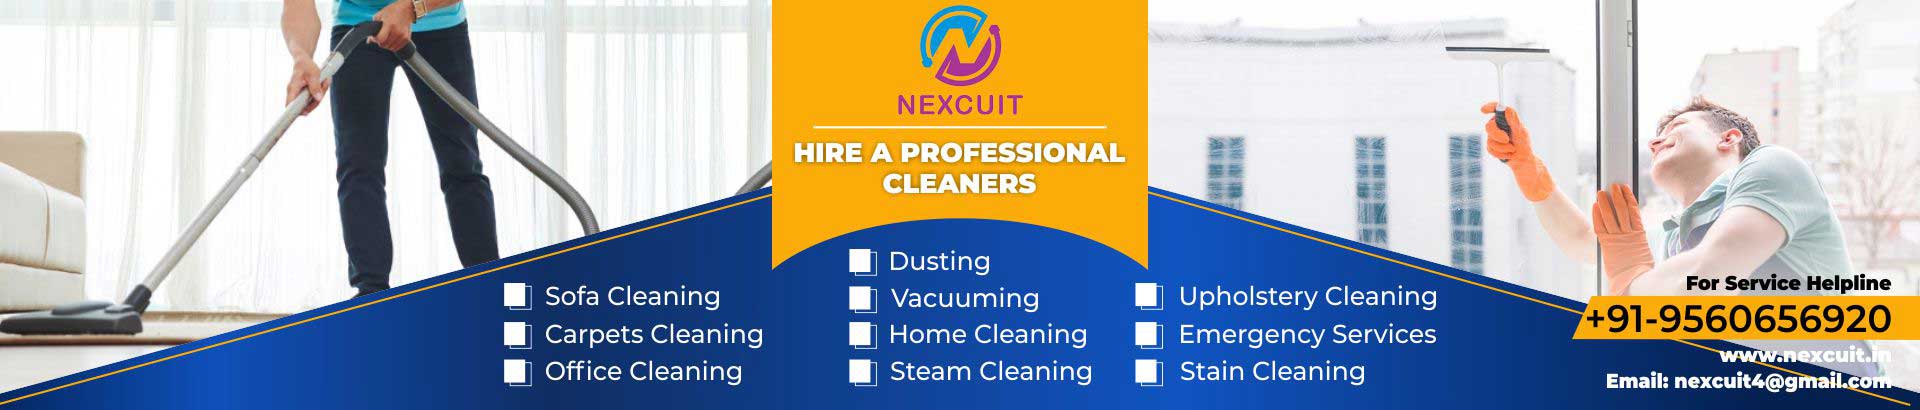 sofa cleaning service in delhi